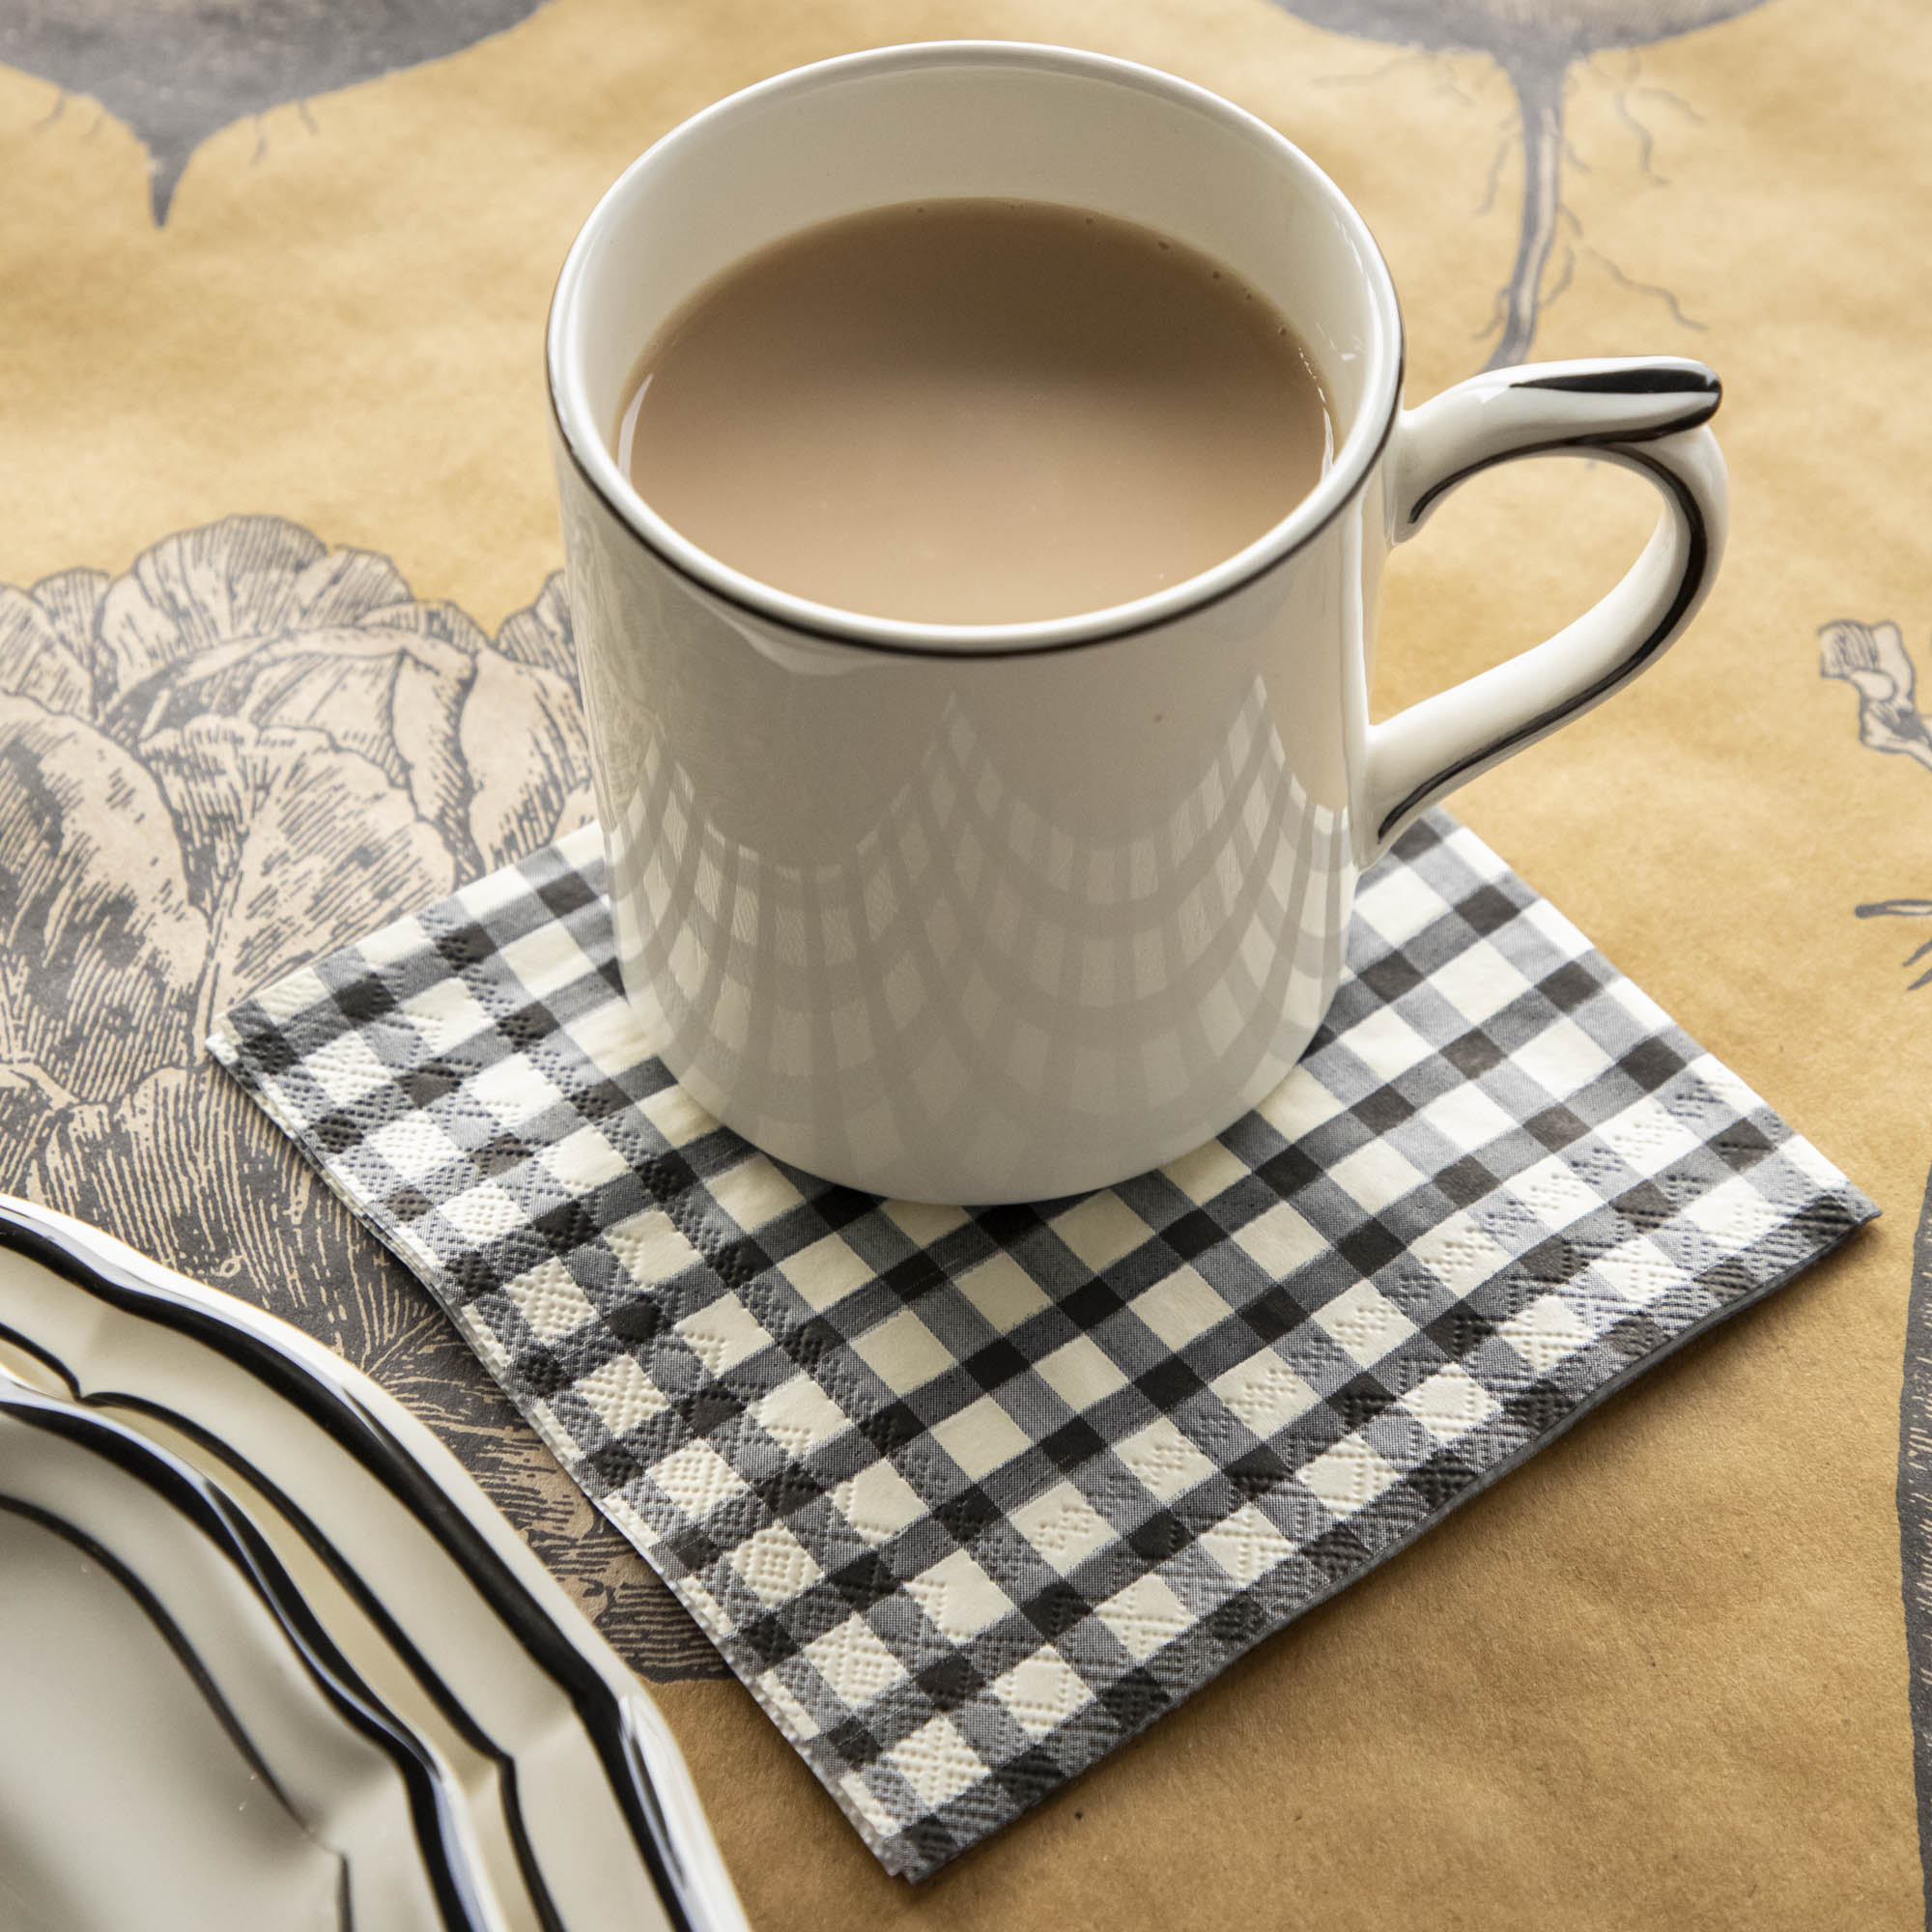 An elegant fall table setting with a Black Painted Cocktail Napkin under a coffee cup.